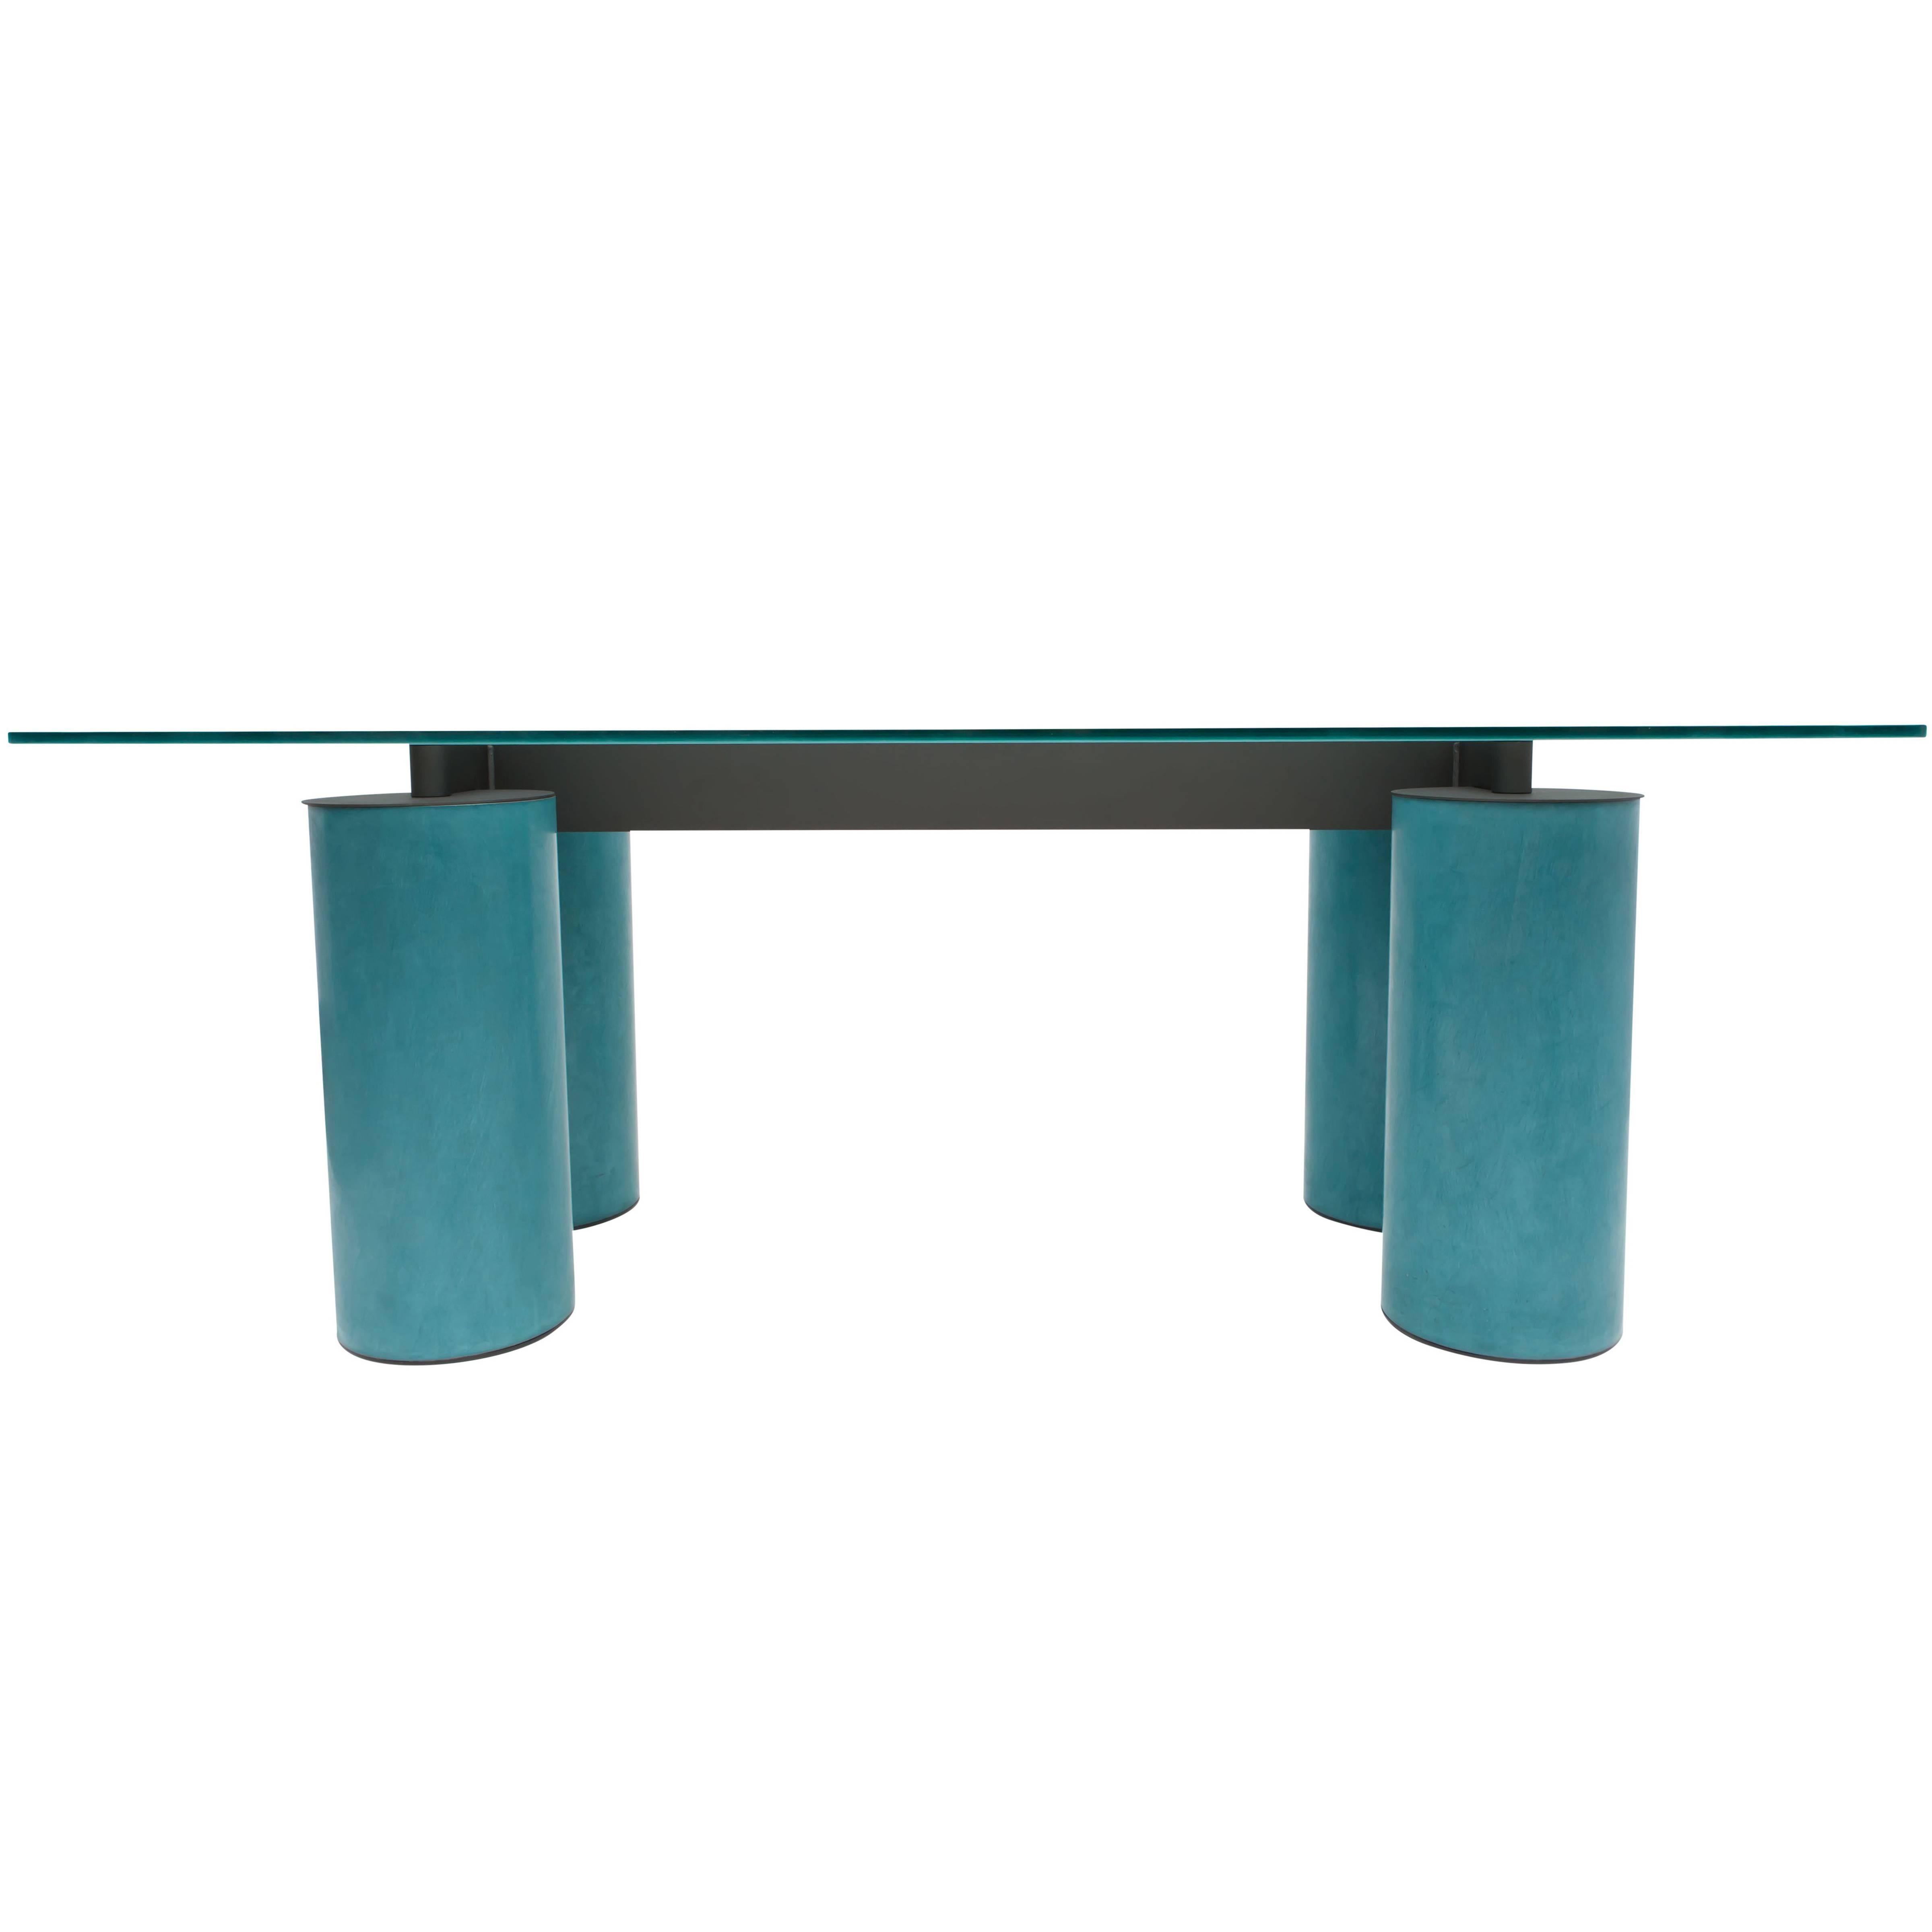 Postmodern memphis style Serenissimo Table Desk by Vignelli for Acerbis